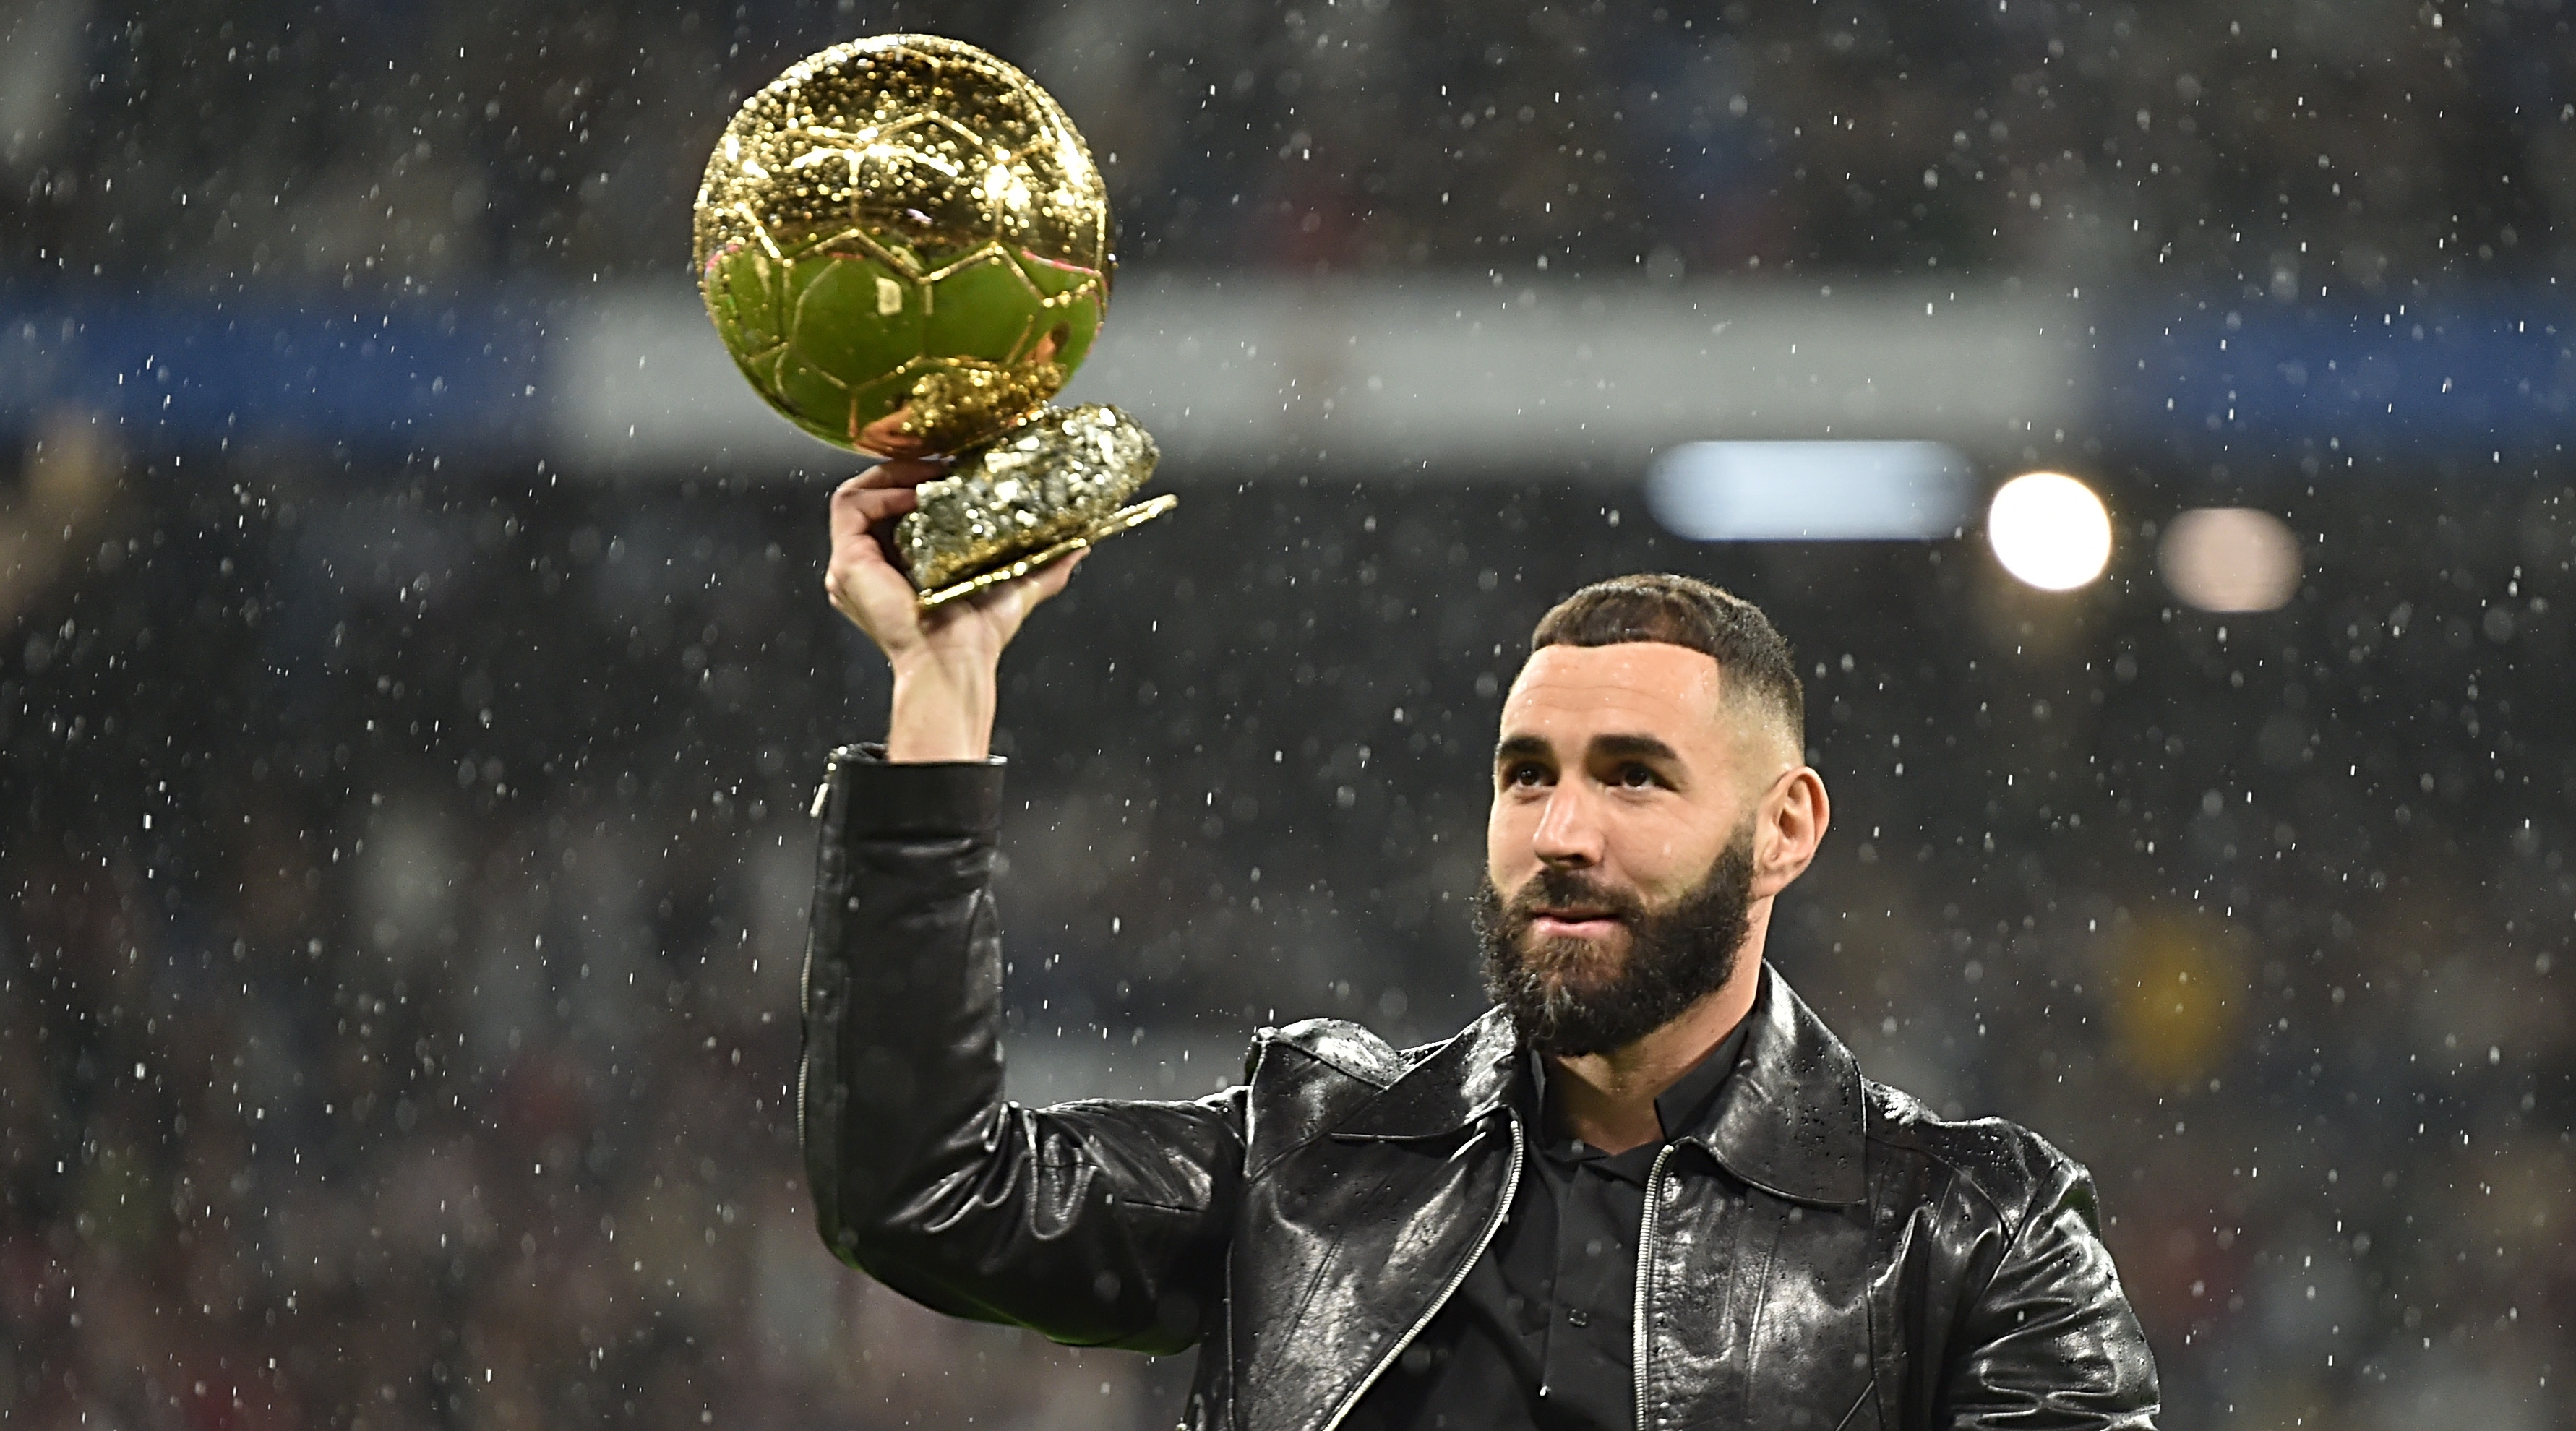  MADRID, SPAIN - OCTOBER 22: Karim Benzema of Real Madrid holds the Ballon d''Or award ahead of the LaLiga Santander match between Real Madrid CF and Sevilla FC at Estadio Santiago Bernabeu on October 22, 2022 in Madrid, Spain. (Photo by Denis Doyle/Getty Images)